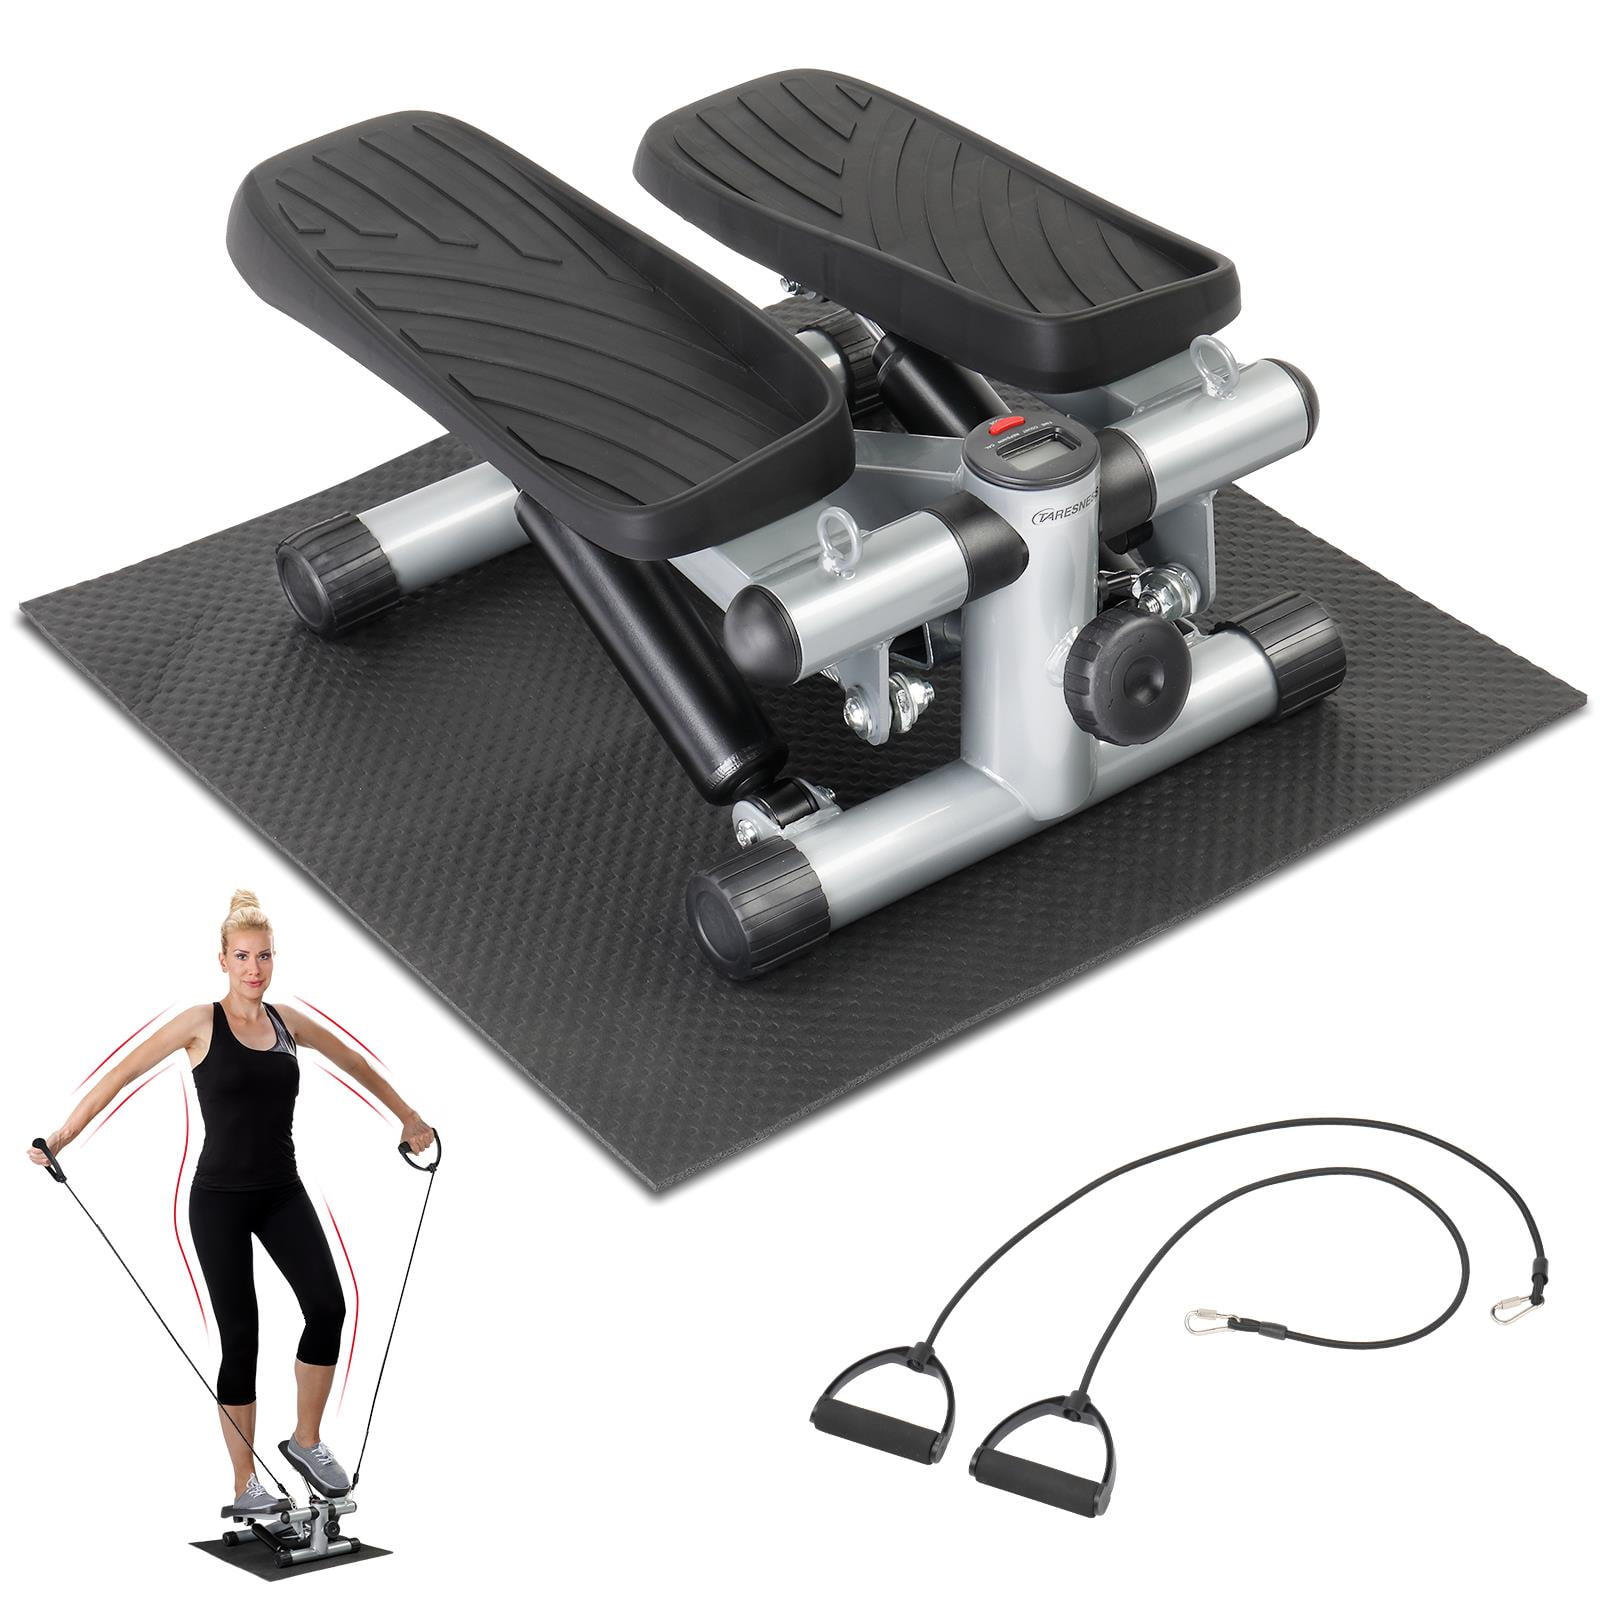 bubbacare Tohoyard Steppers for Exercise, Mini Stepper with LcD Monitor,  Quiet Fitness Stepper with Resistance Bands, gym Stair Stepper fo